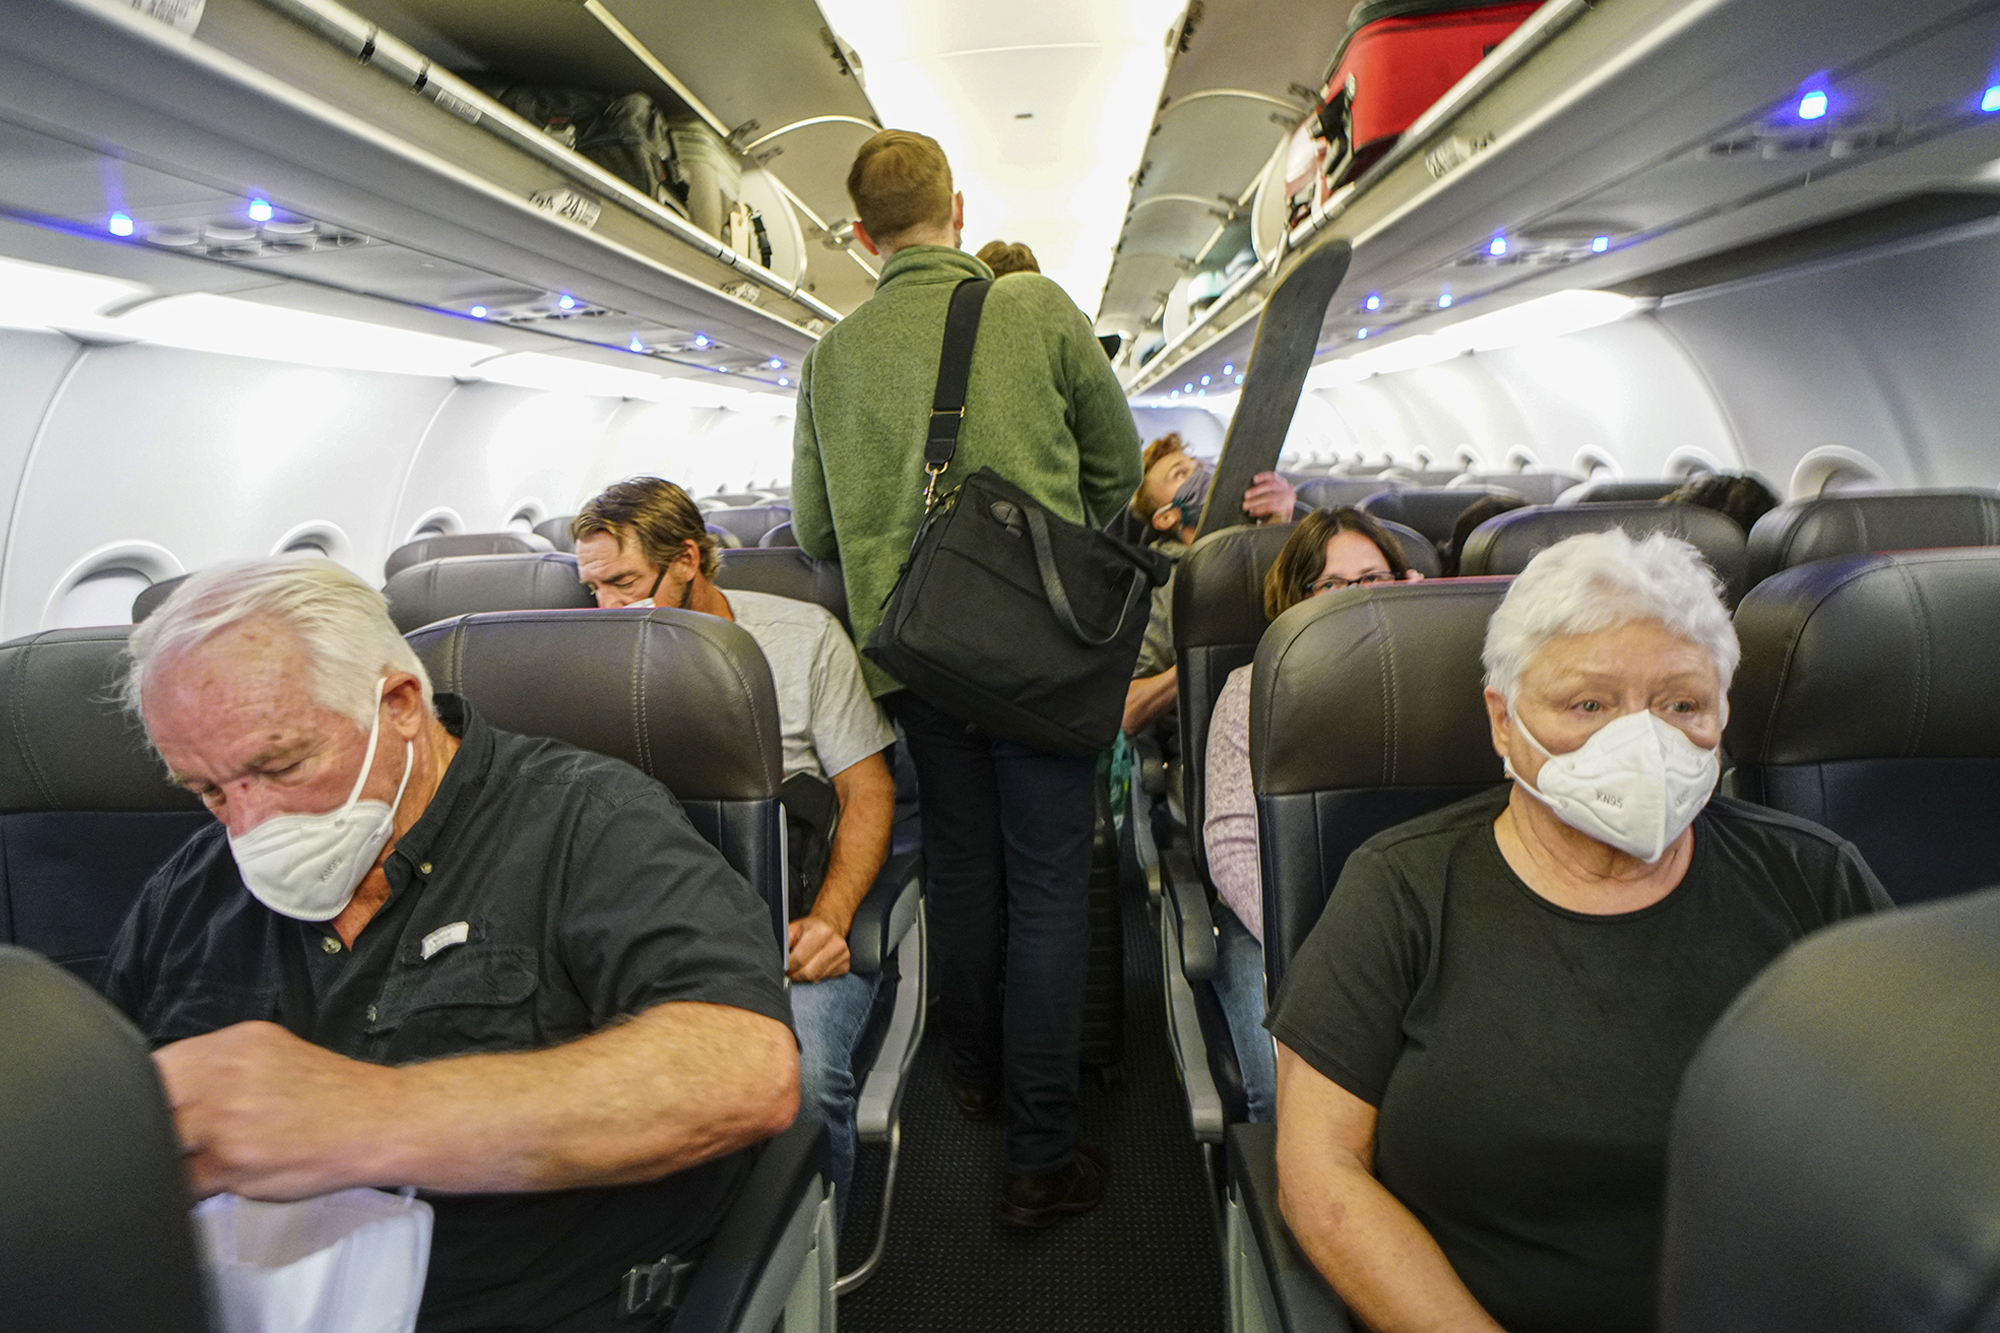 Two major airline CEOs quiz effectiveness of mask mandates on planes